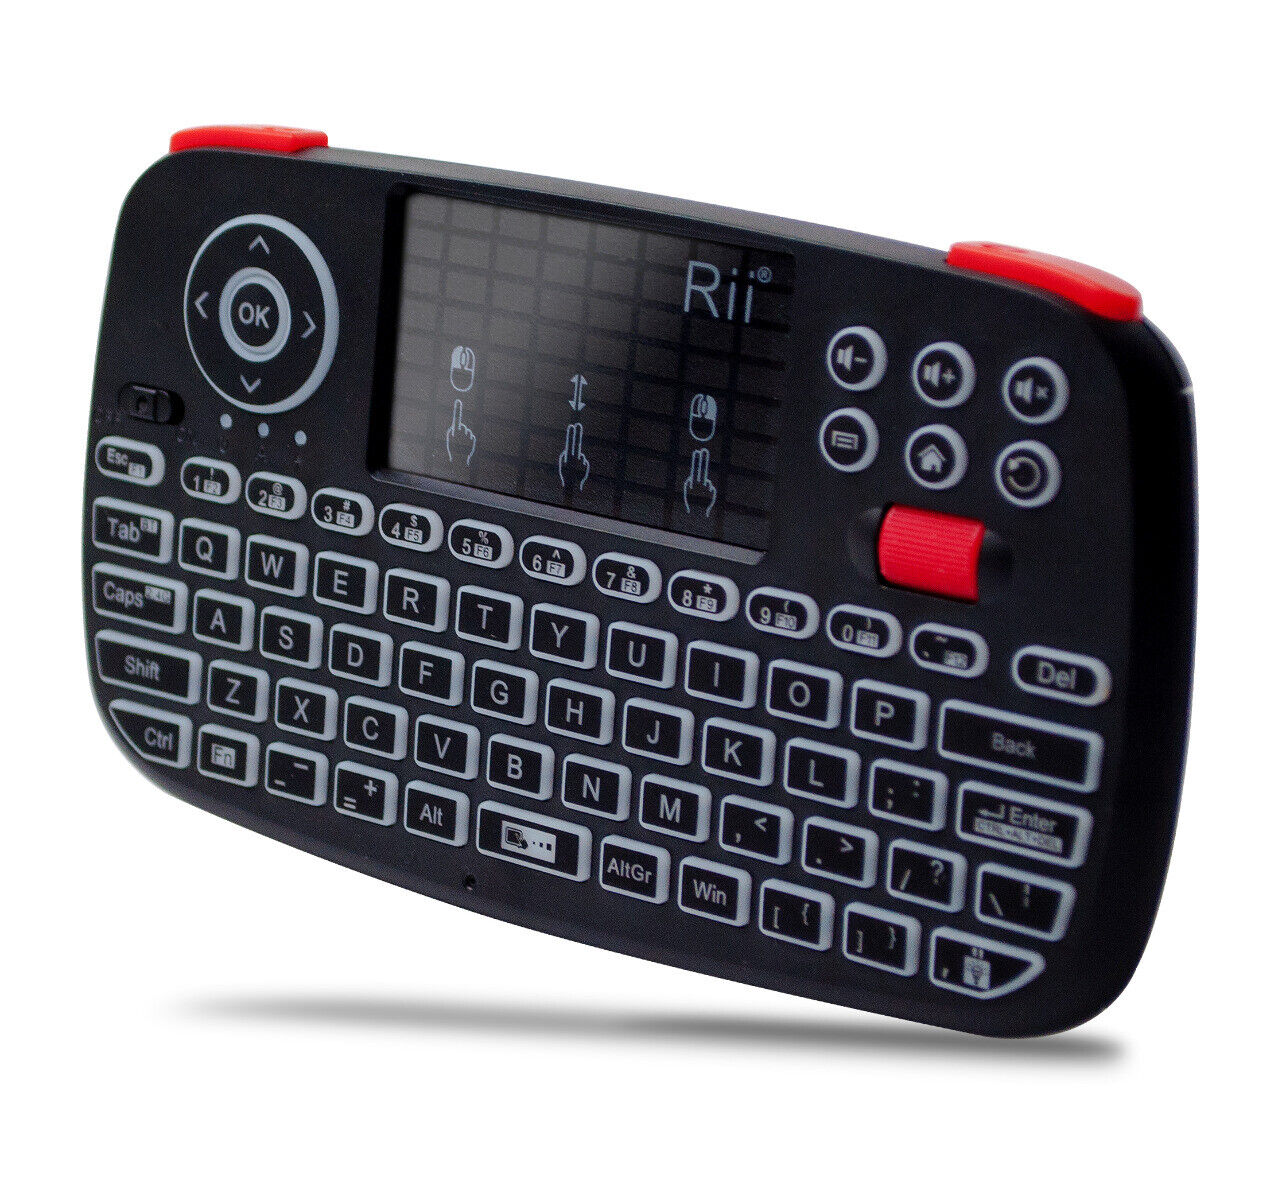 Rii i4 Mini Keyboard with duo connection (Wireless, Bluetooth)